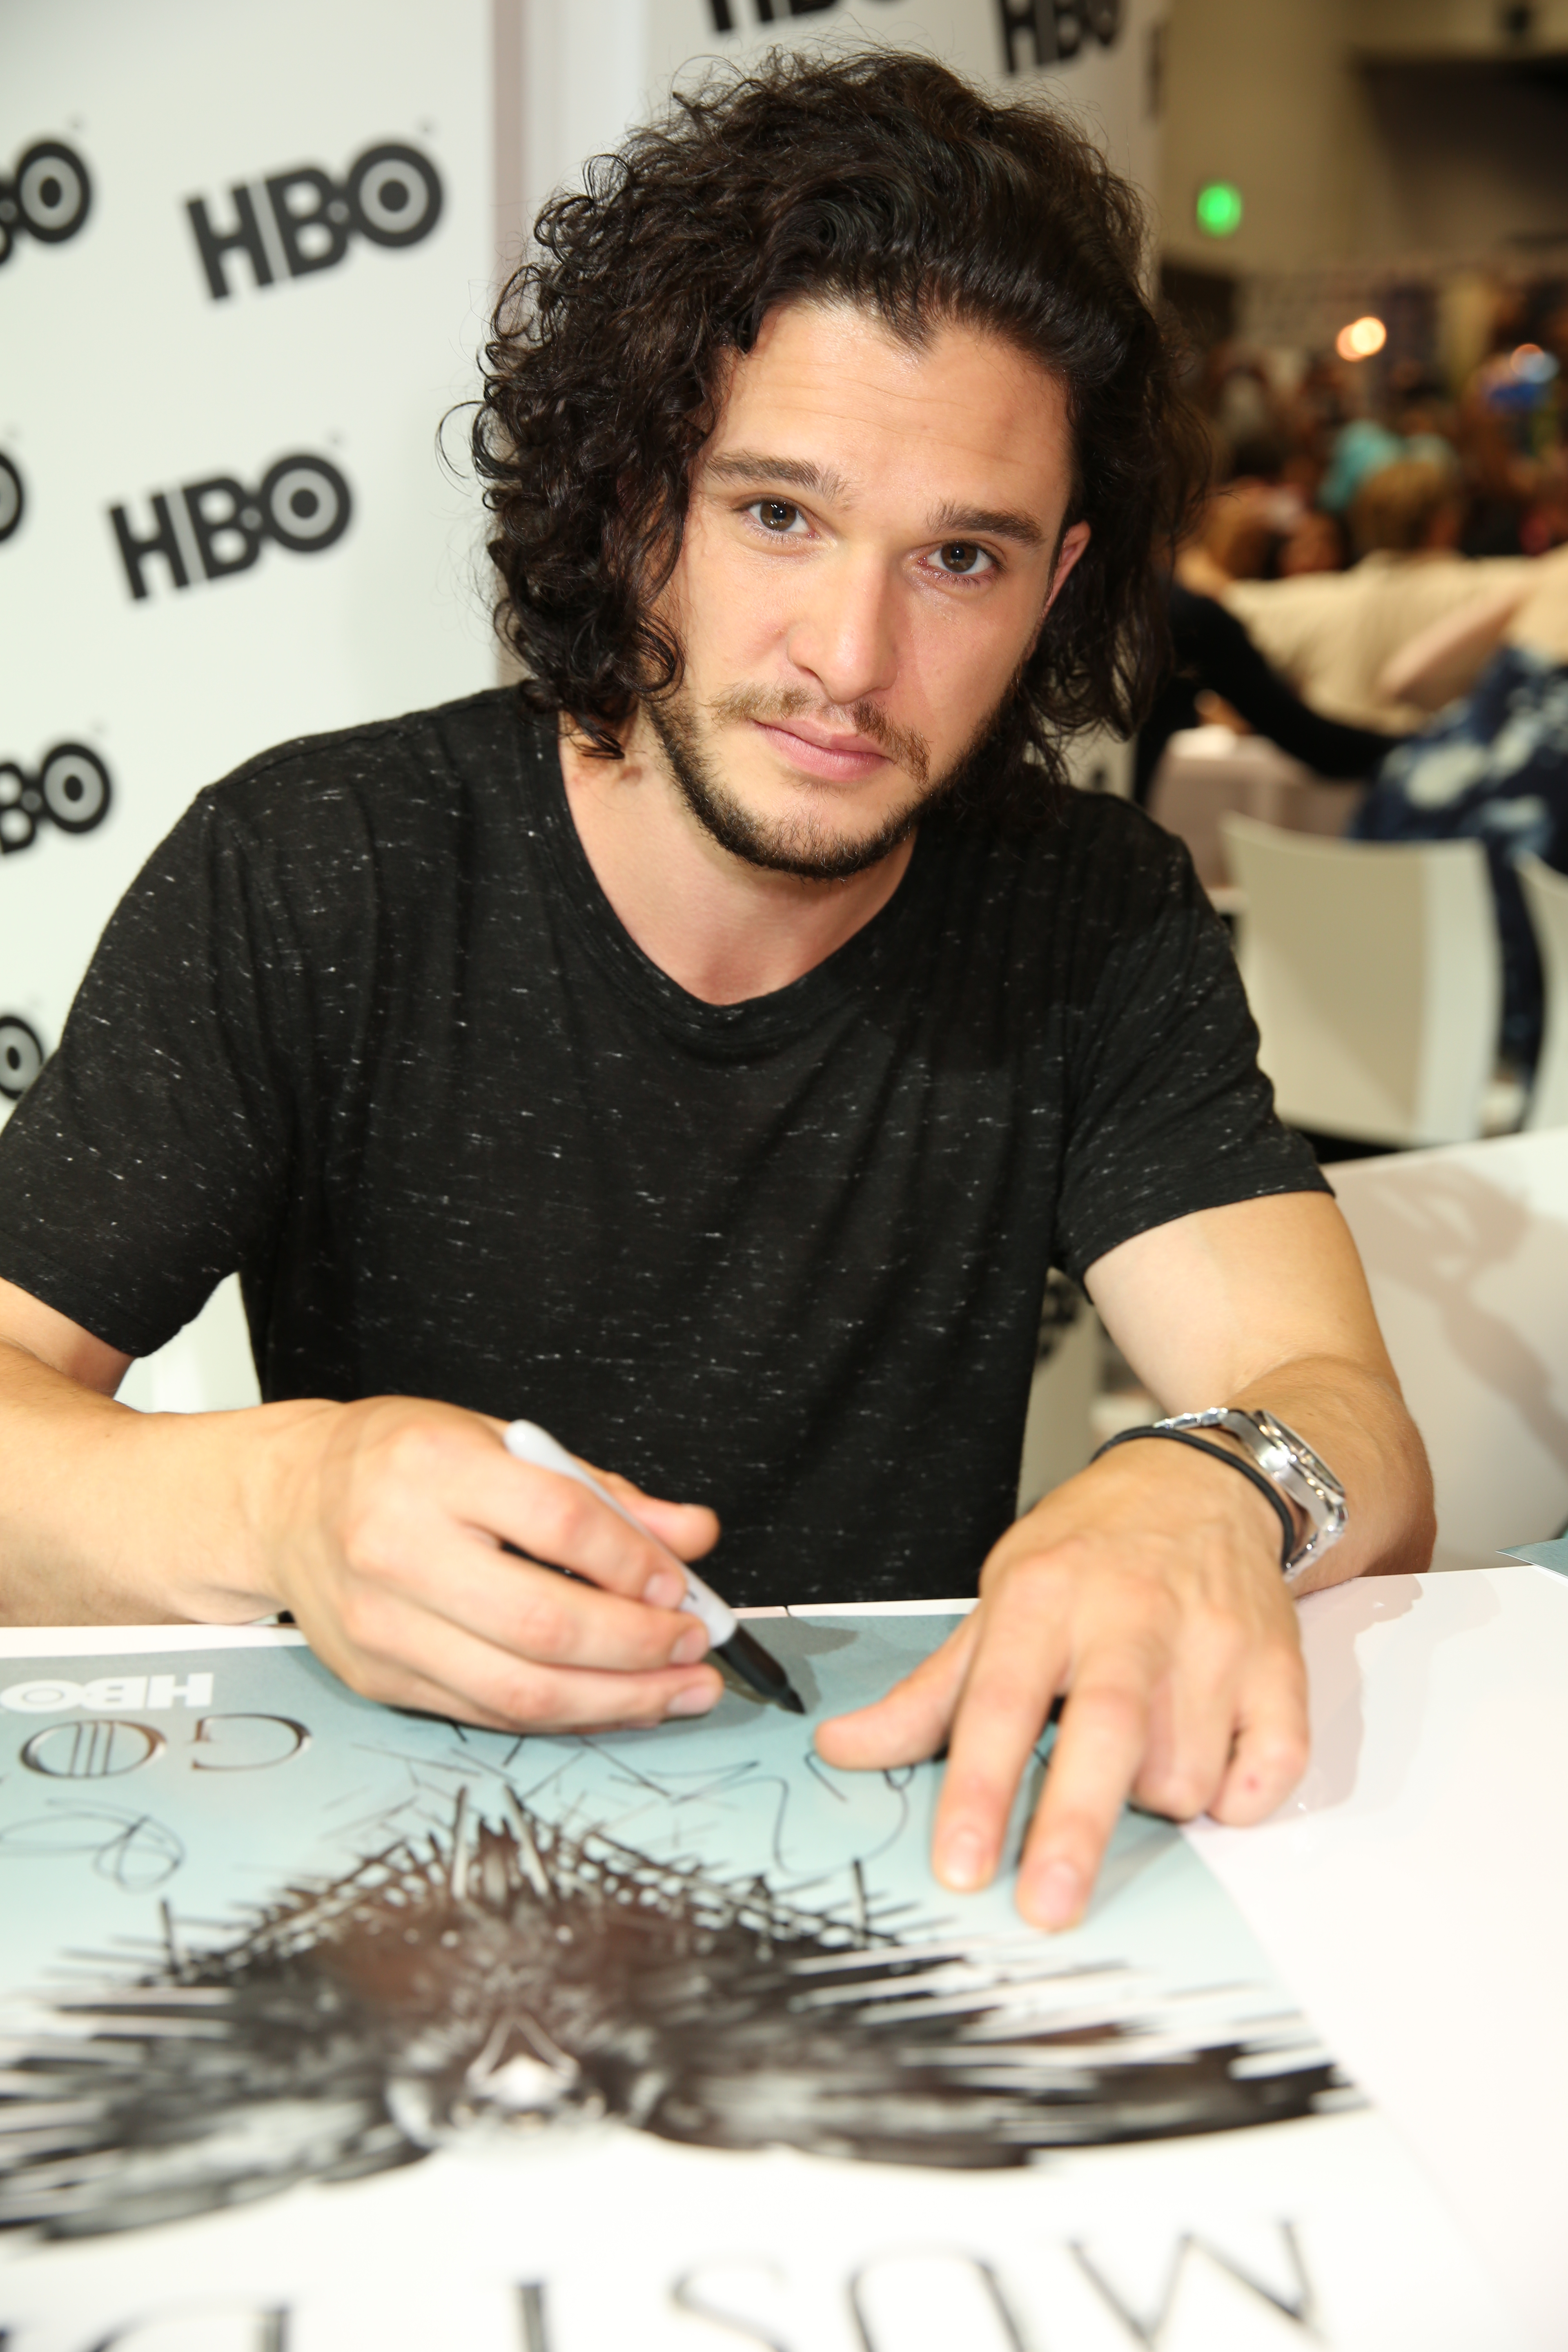 13 Kit Harington Hair Photos That Are Completely Epic, Especially When You  Consider The Dude Behind The Strands